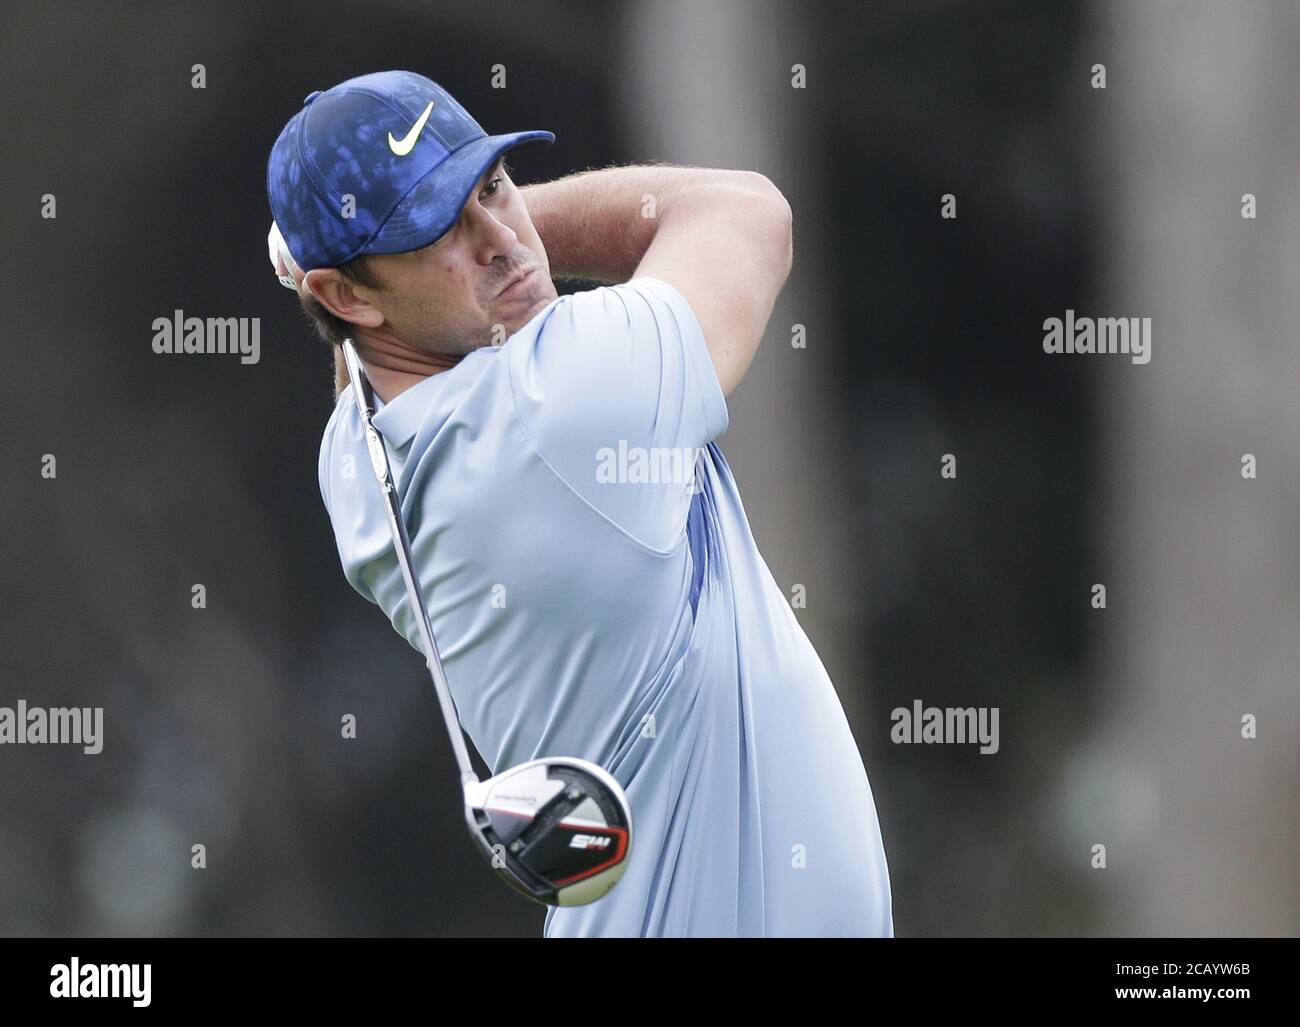 San Francisco, United States. 09th Aug, 2020. Brooks Koepka hits his tee shot on the 4th hole in the final round of the 102nd PGA Championship at TPC Harding Park in San Francisco on Sunday, August 9, 2020. Photo by John Angelillo/UPI Credit: UPI/Alamy Live News Stock Photo